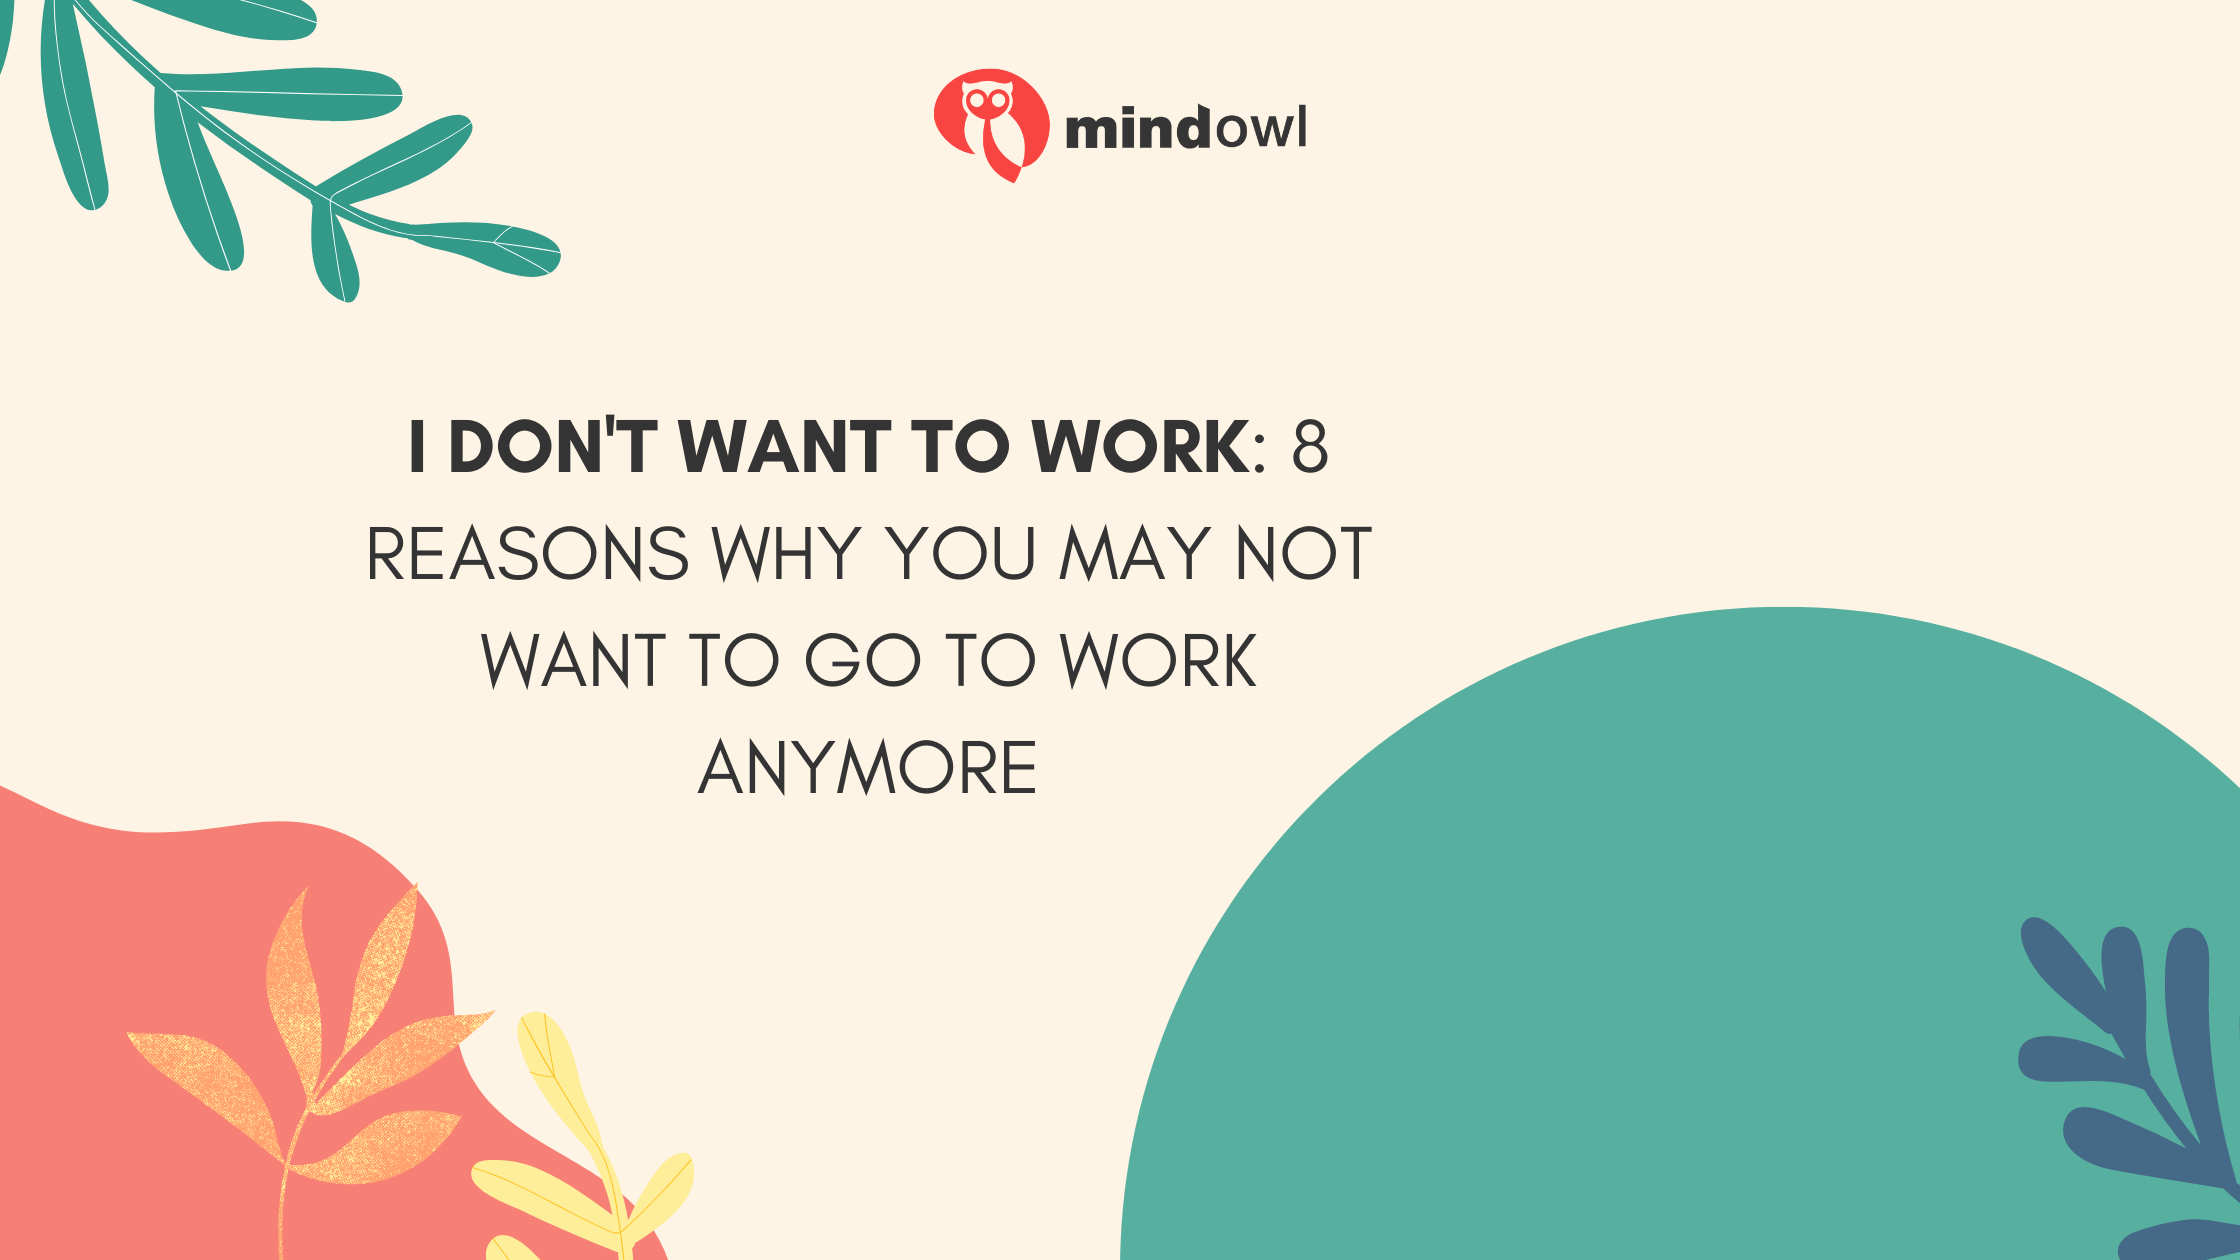 I Don’t Want To Work: 8 Reasons Why You May Not Want To Go To Work Anymore